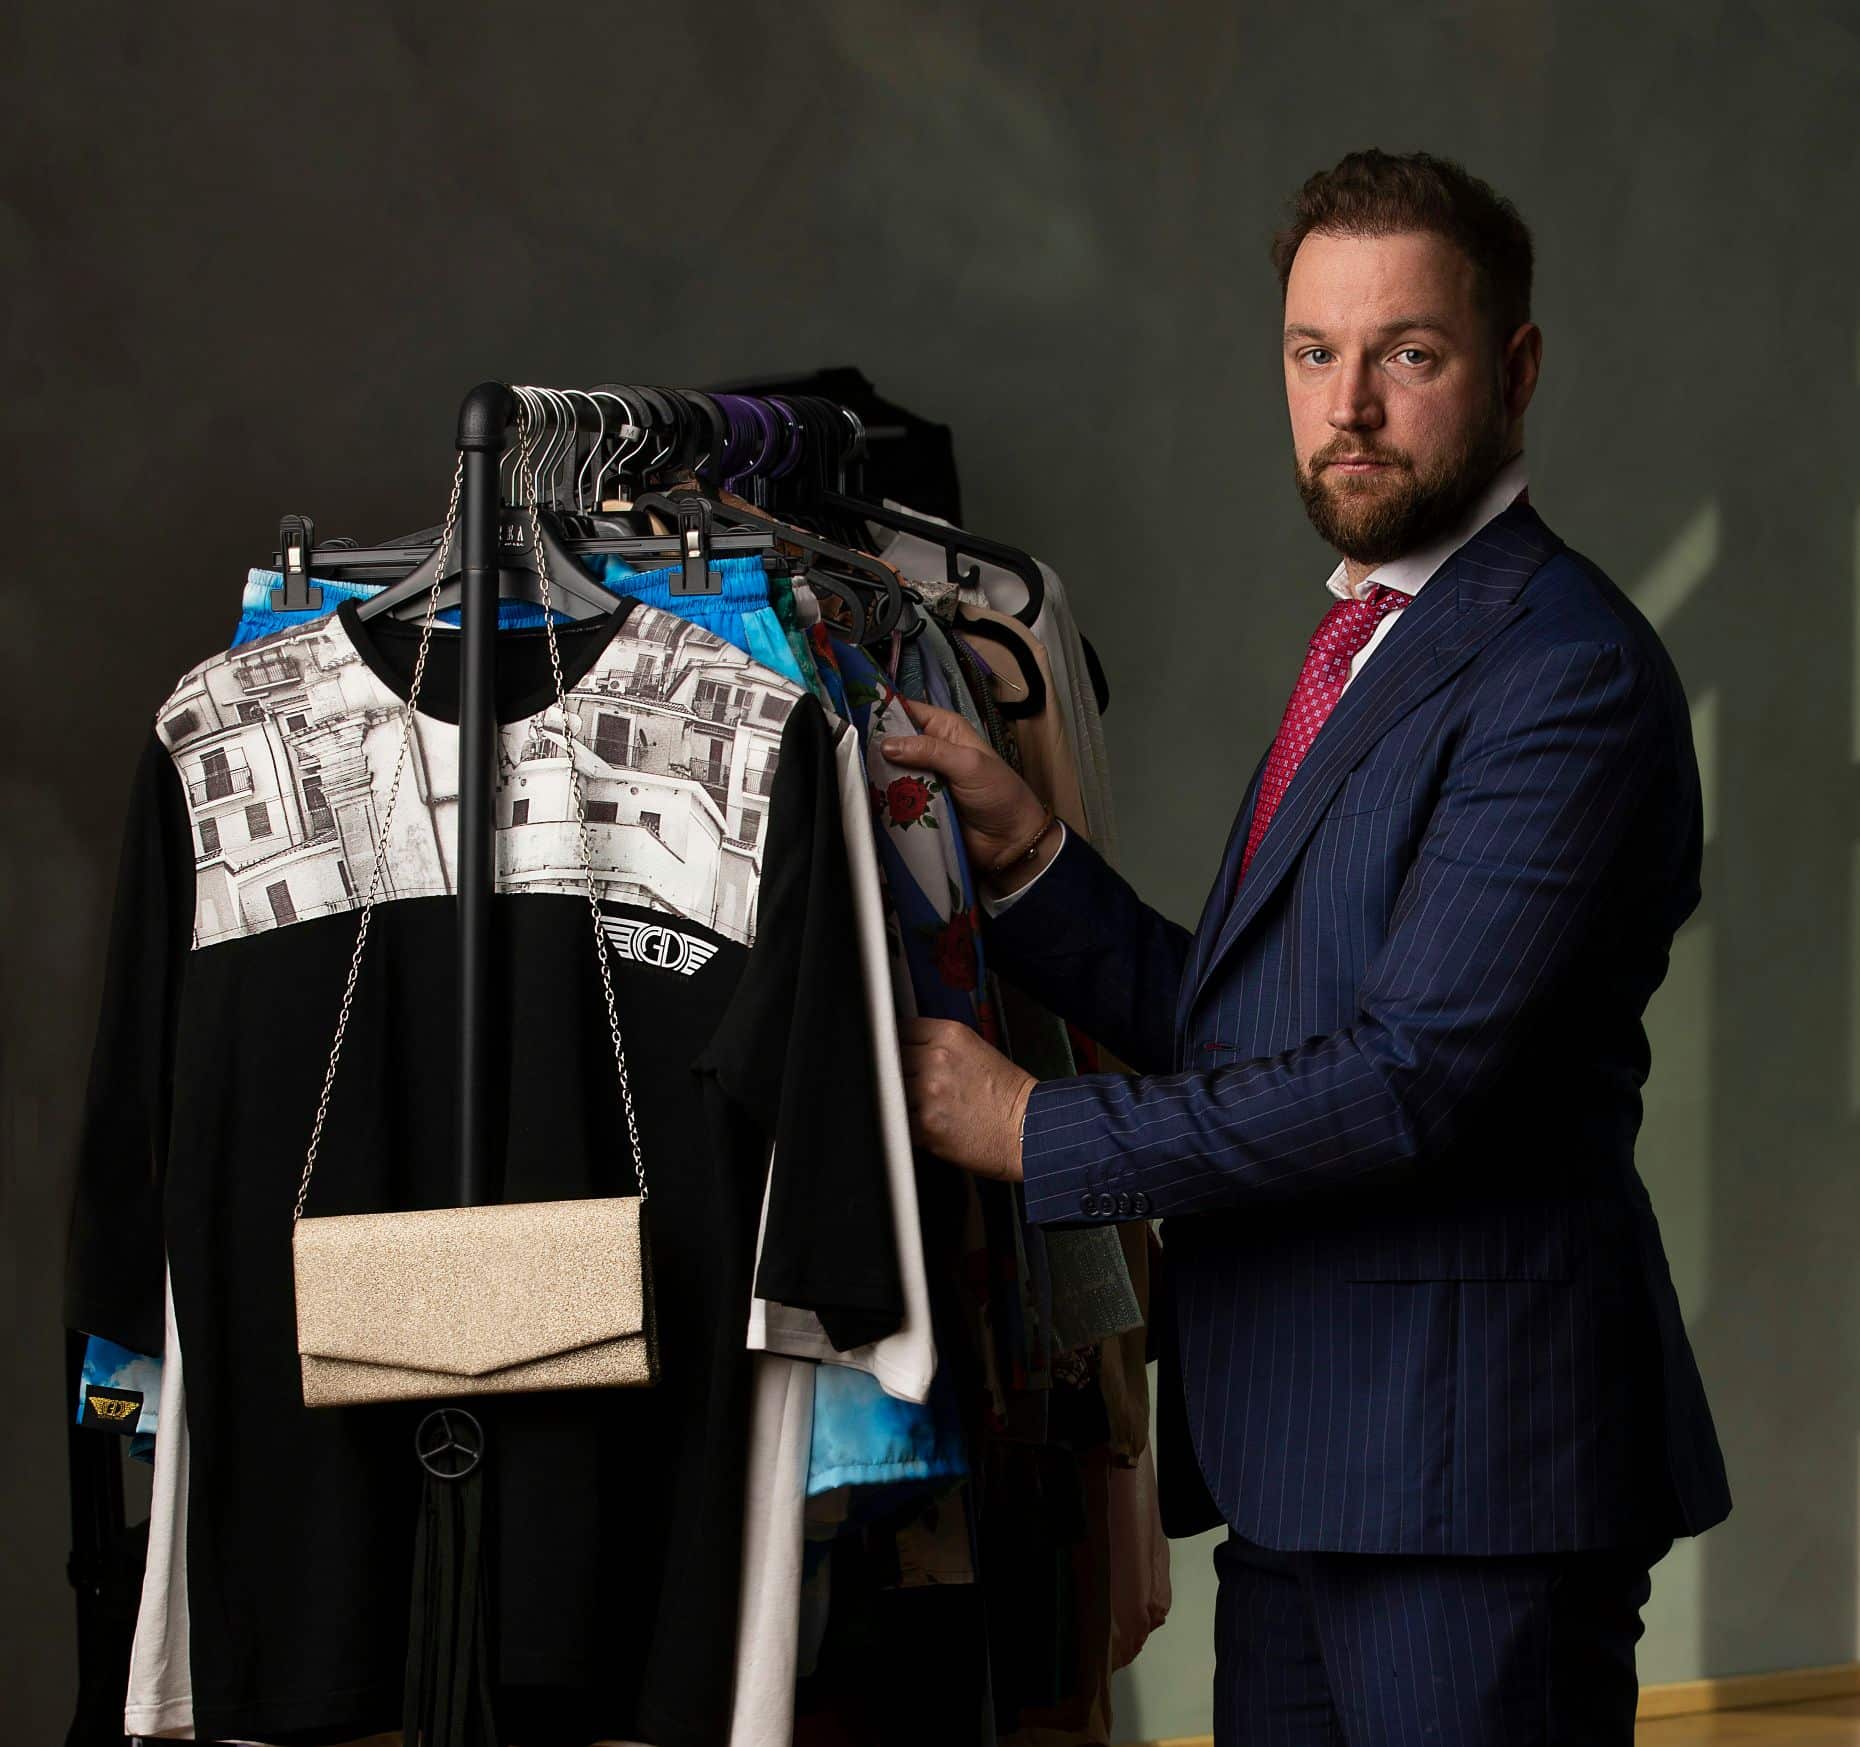 A man in a suit and tie stands next to a coat rack full of various garments, holding one of the items, as if ready to create a fashion brand.